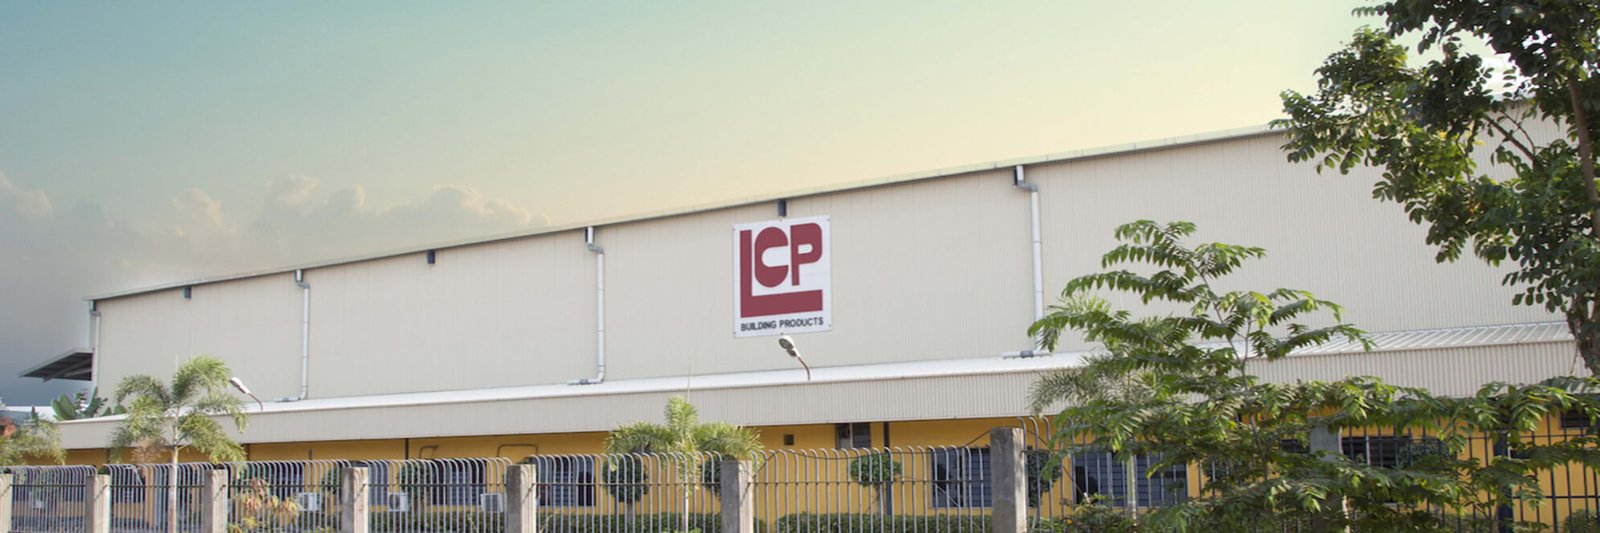 best roof sheet manufacturer in Chandigarh: LCP Sliders